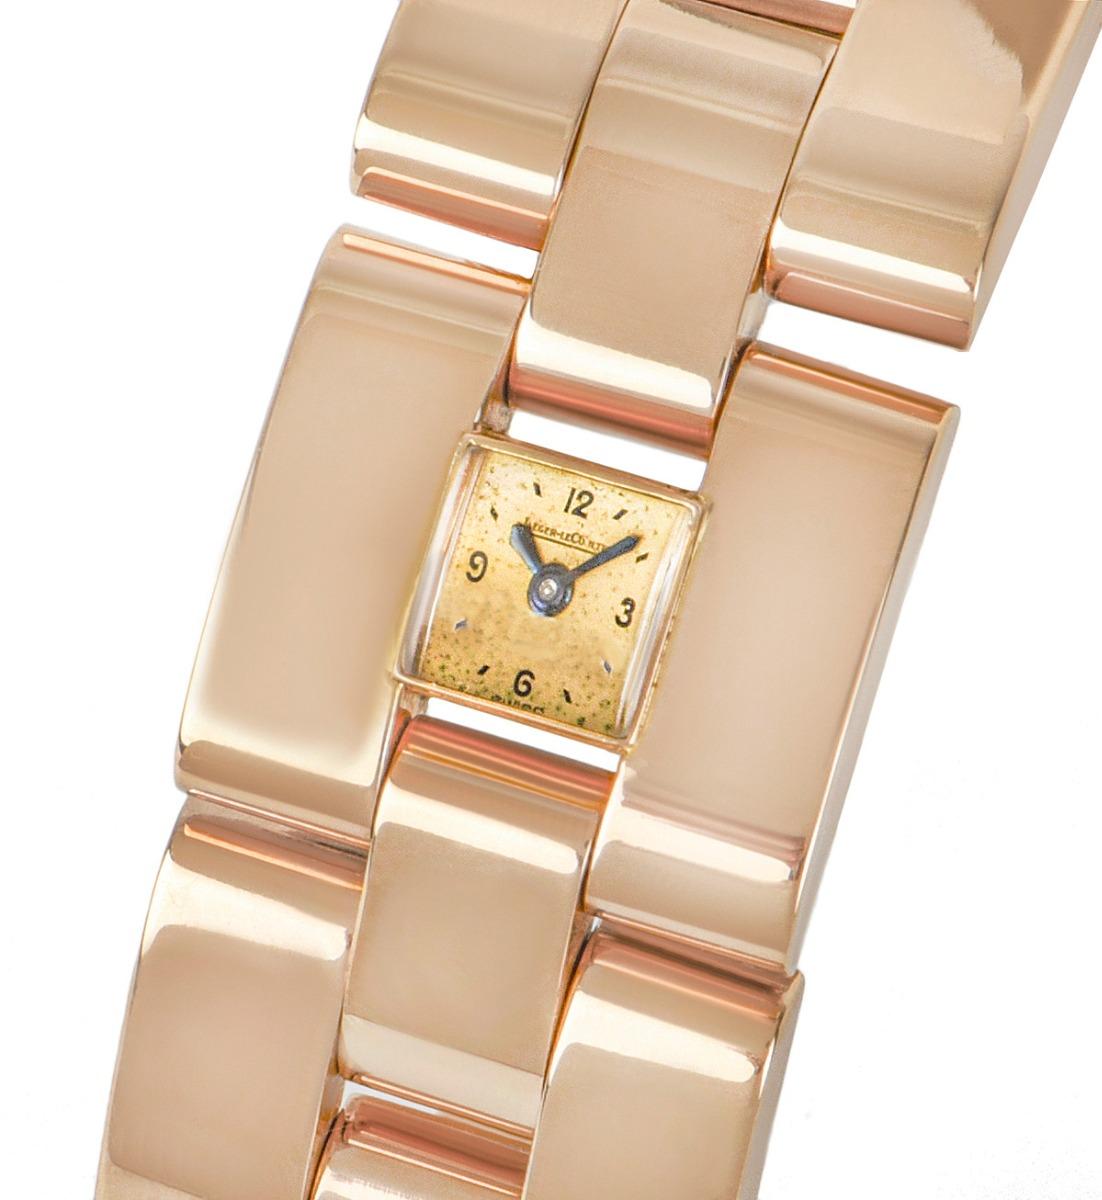 Jaeger LeCoultre Vintage Women's Dress Watch 18K Rose Gold Champagne Dial In Good Condition For Sale In London, GB